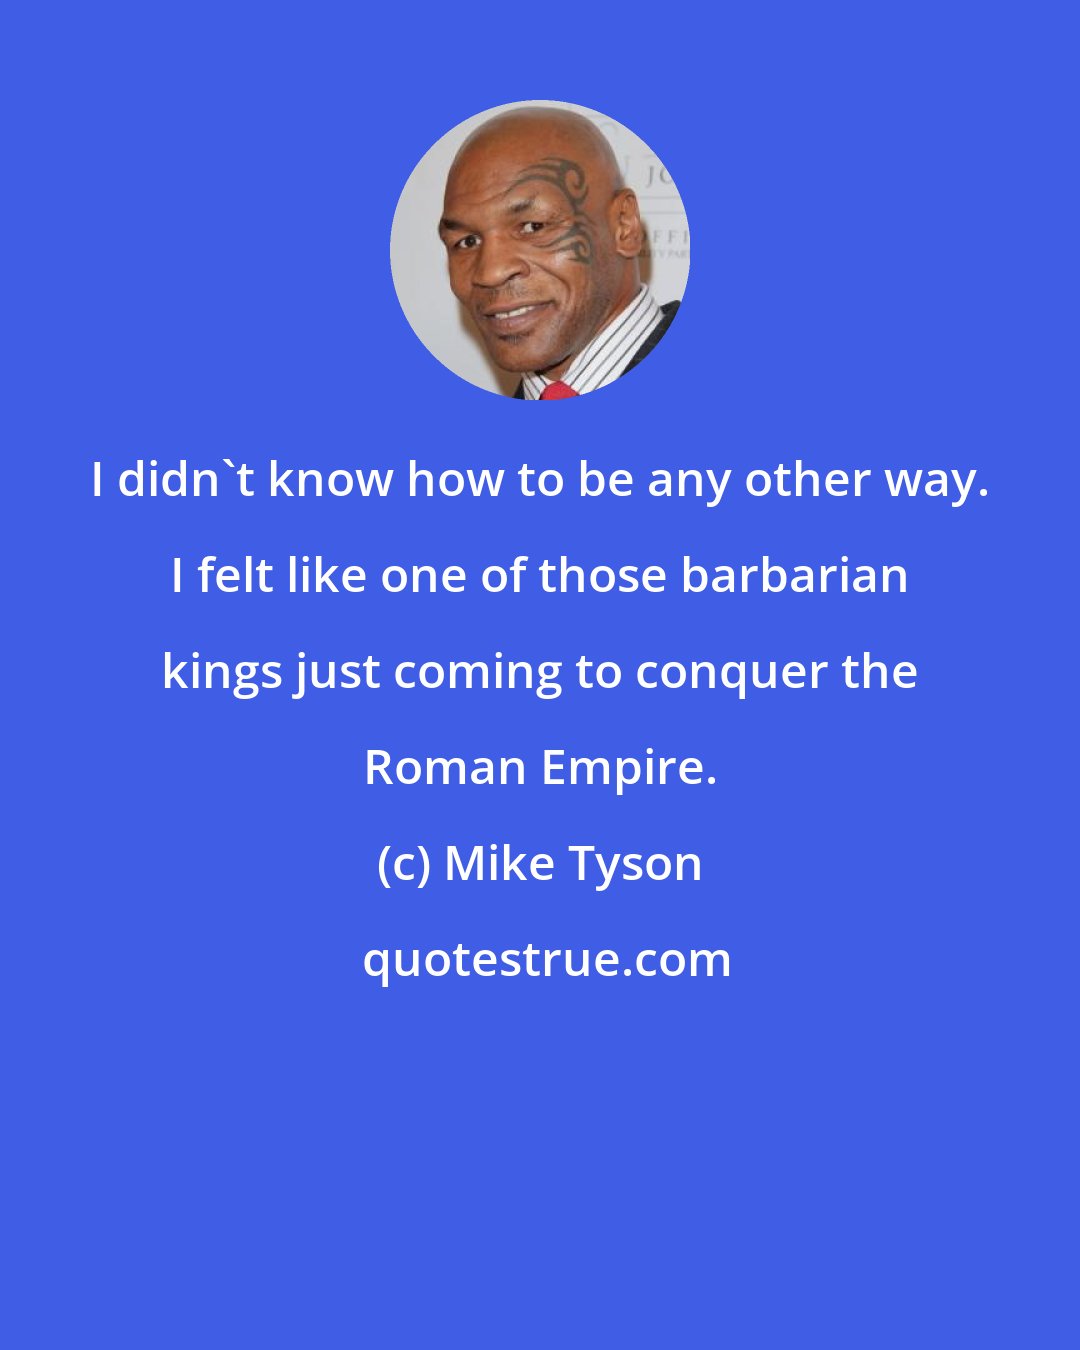 Mike Tyson: I didn't know how to be any other way. I felt like one of those barbarian kings just coming to conquer the Roman Empire.